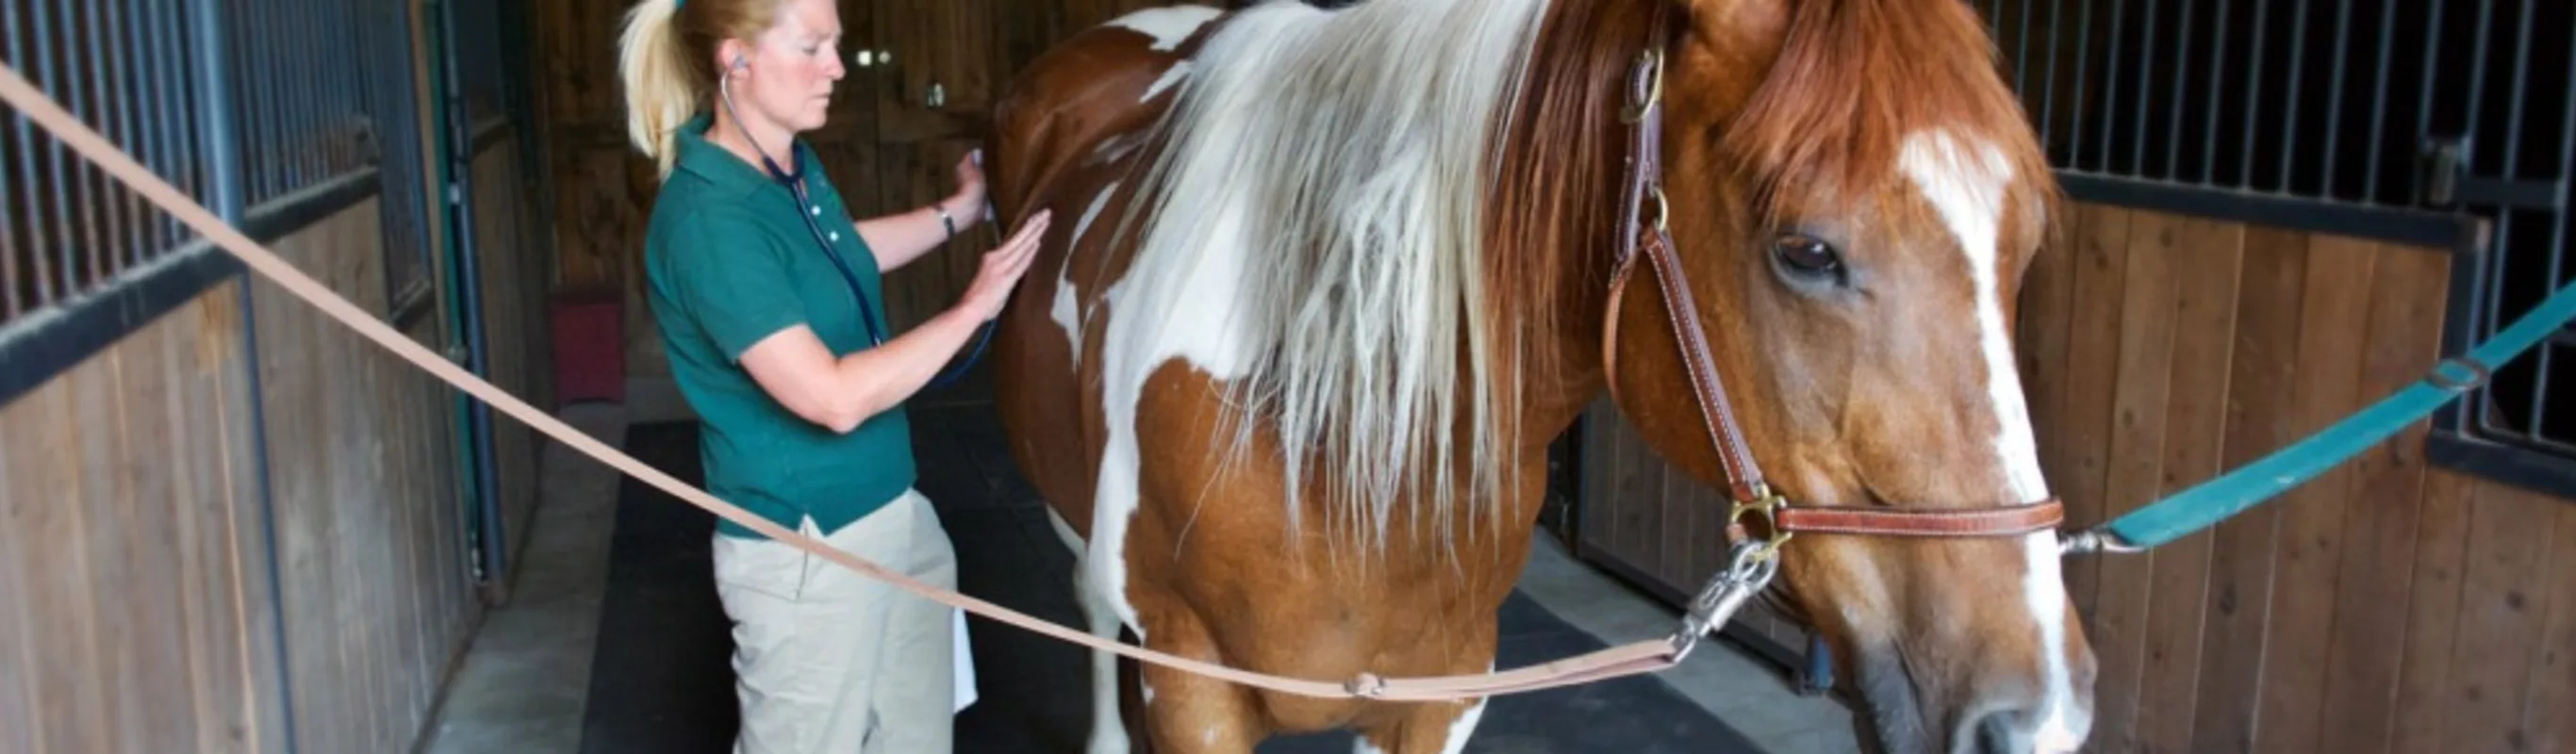 Henniker Veterinary Hospital staff member using a stethoscope on a brown and white horse